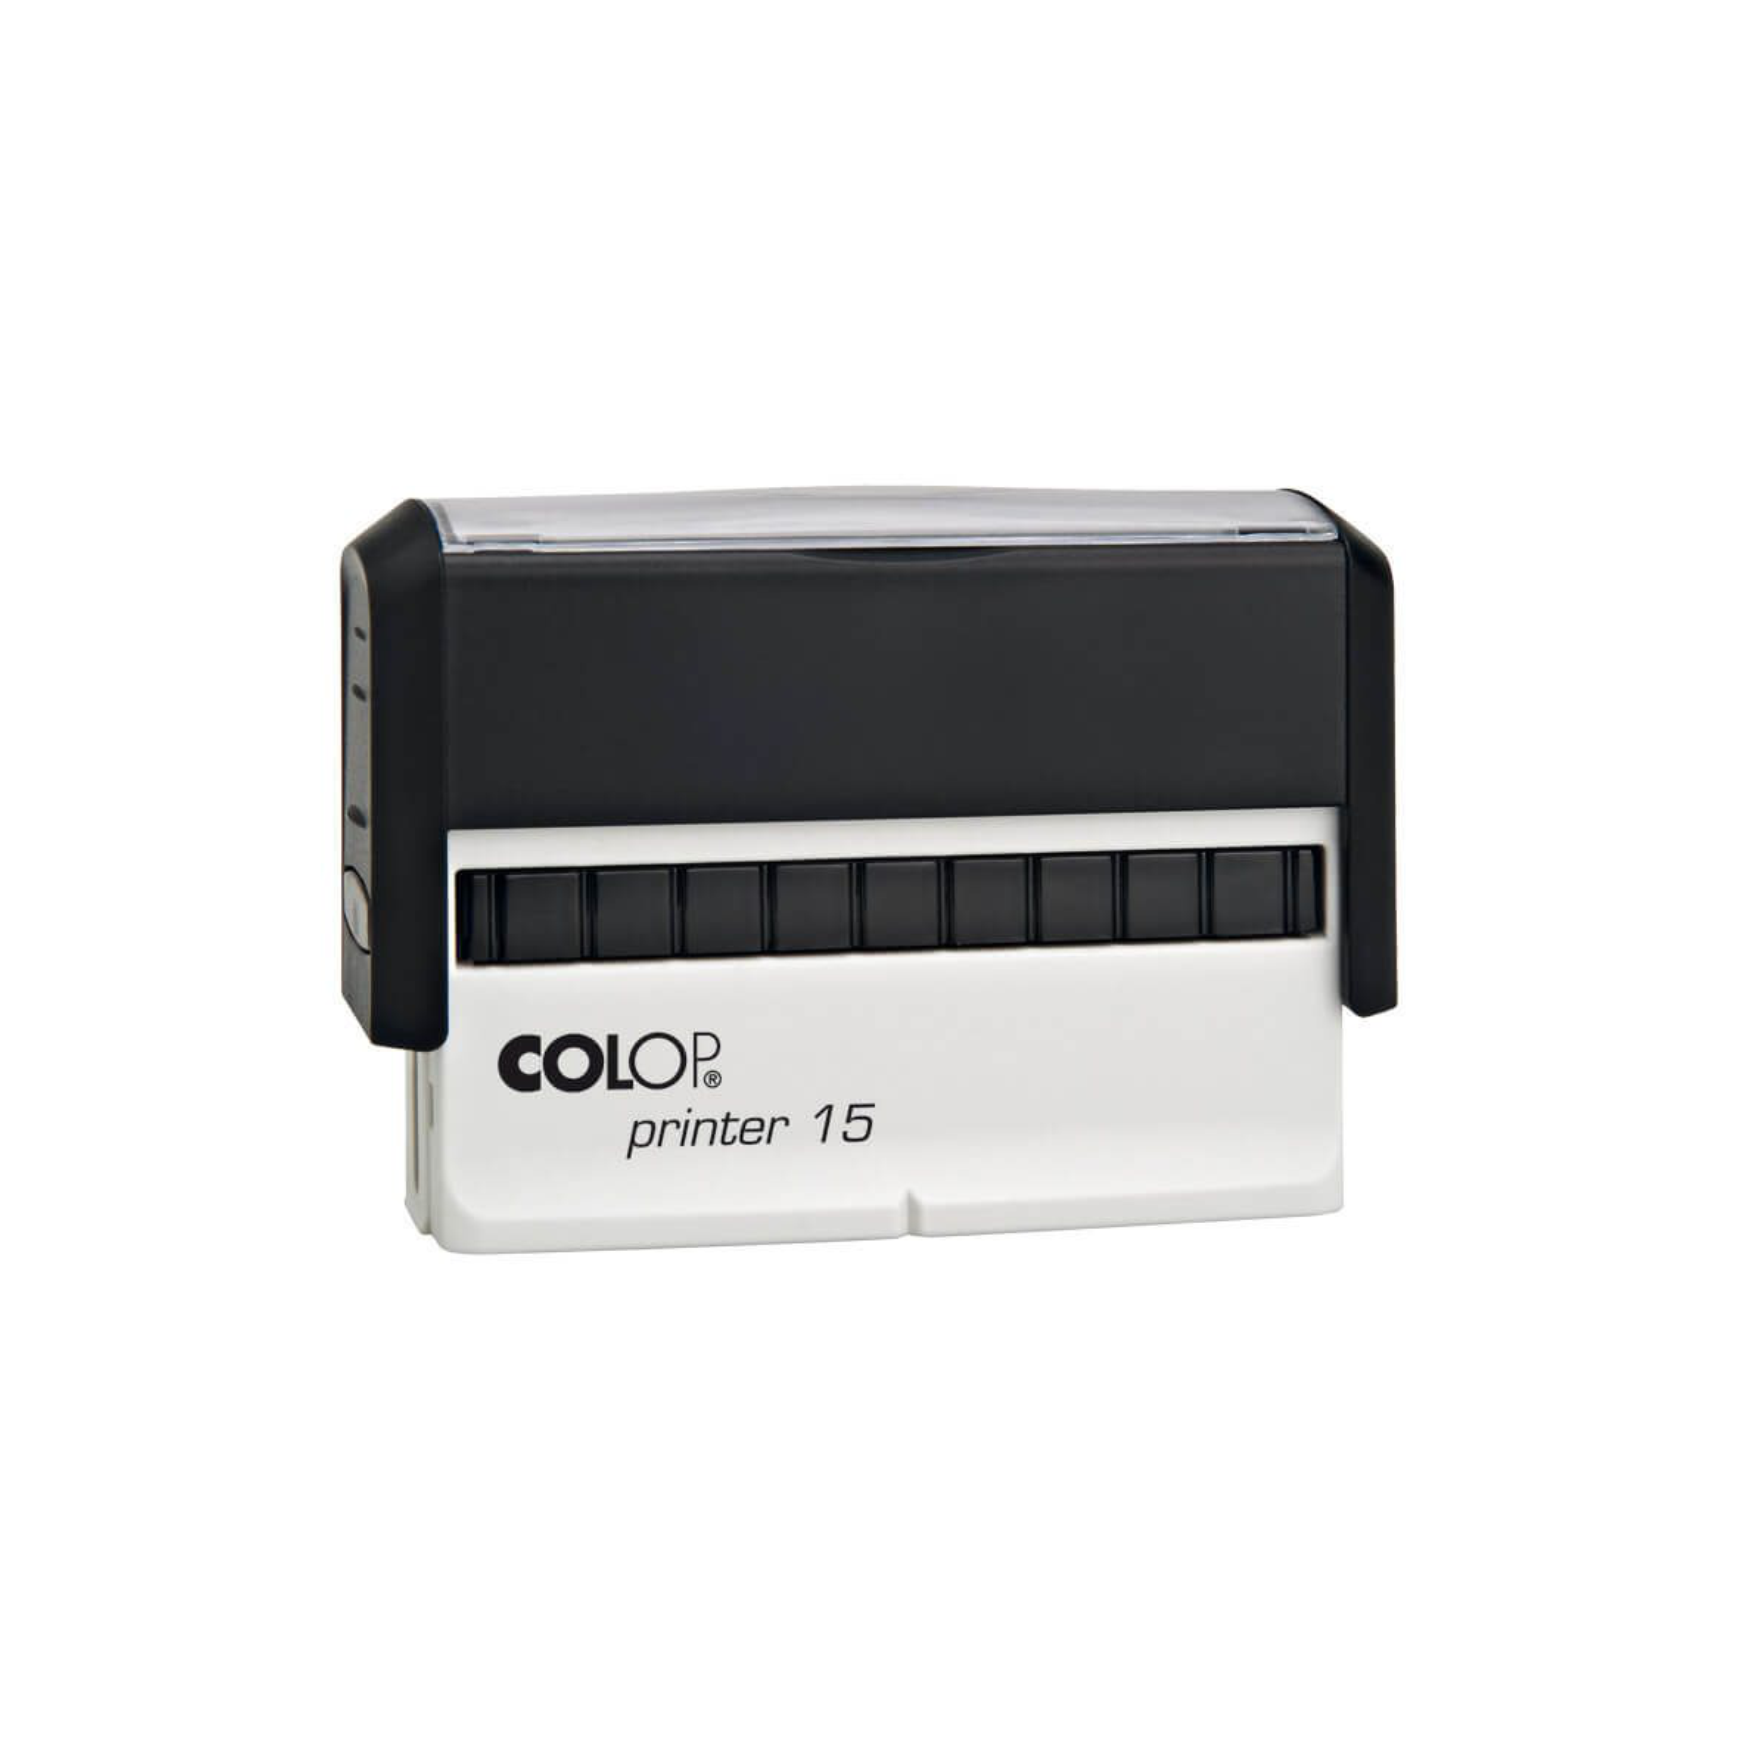 COLOP Printer 15 | 3/8" x 2-3/4" Imprint Size – Rubber Stamp